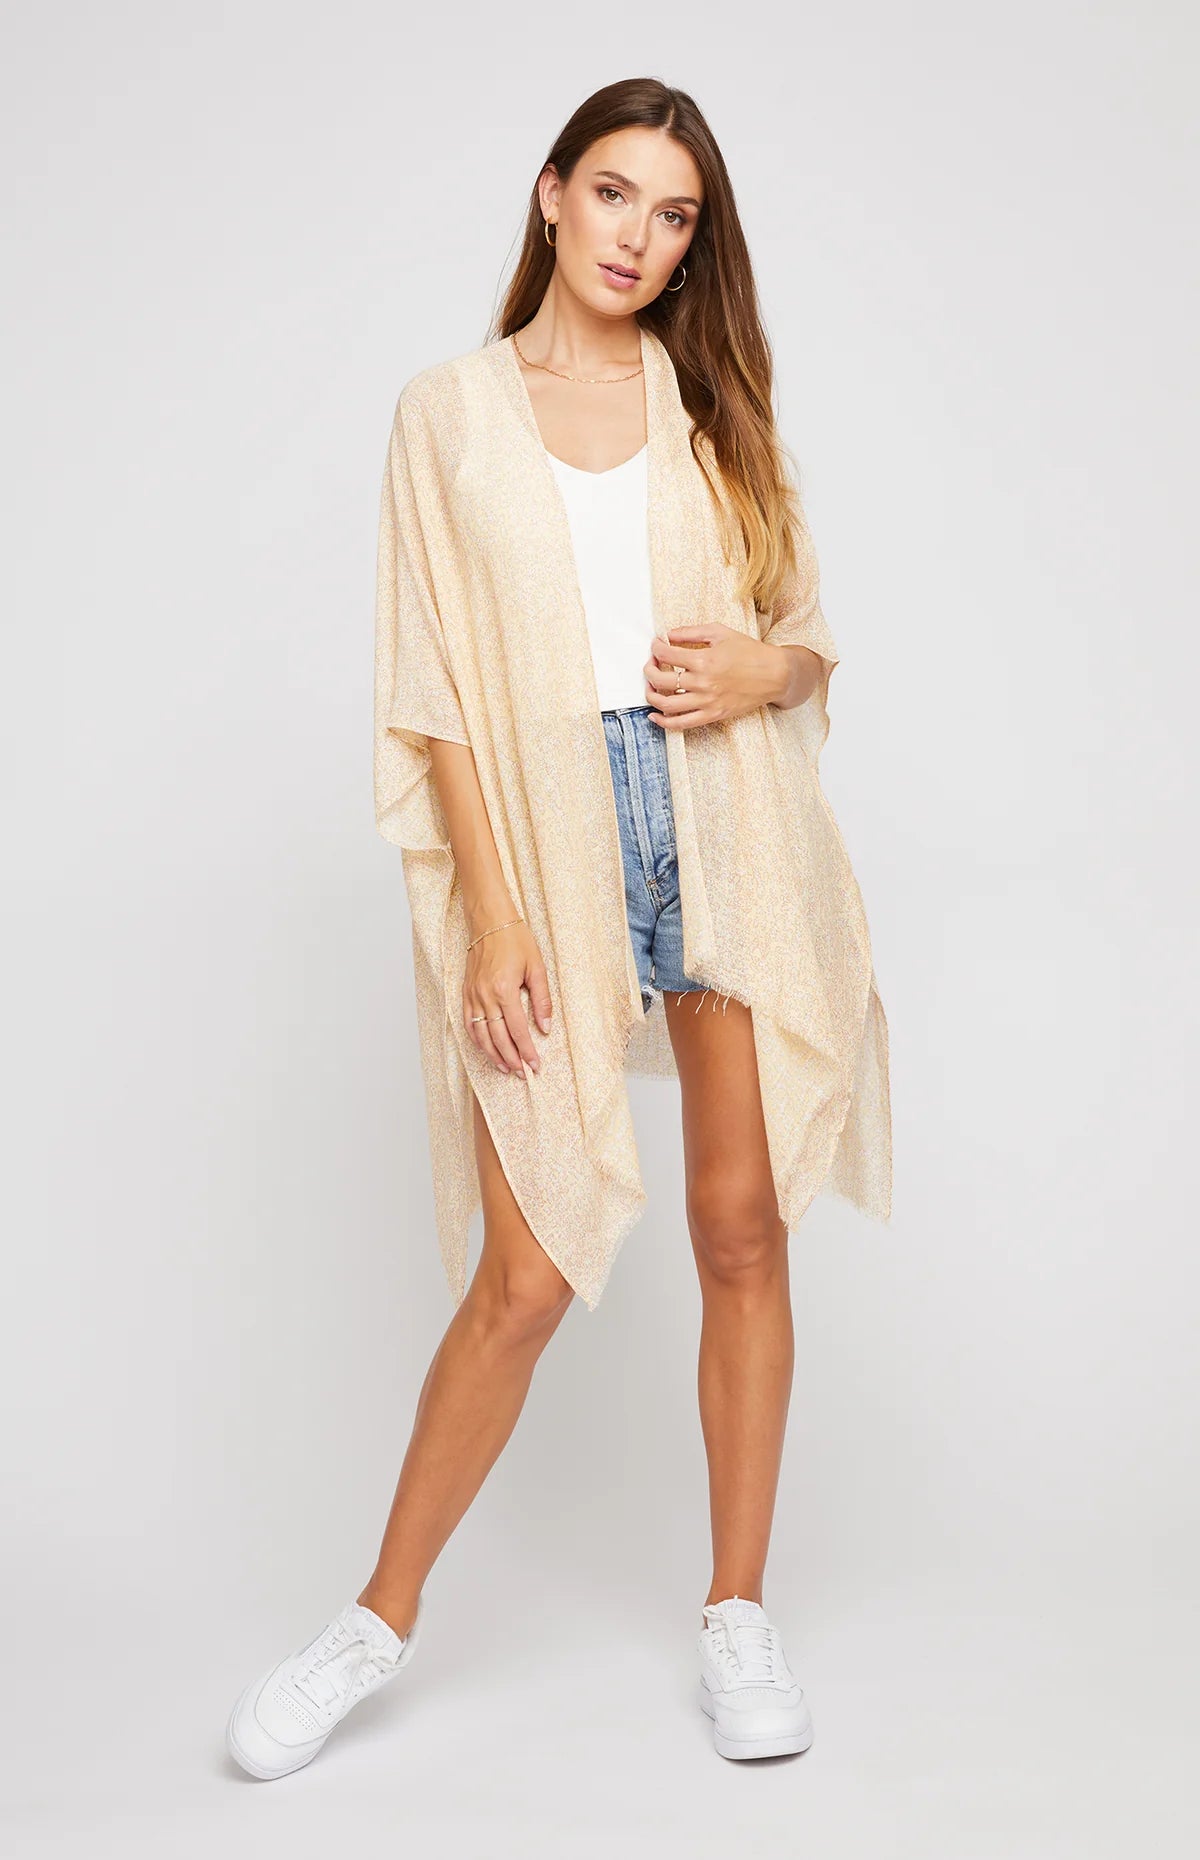 Dawn Cover-Up in Sunlight Sprig